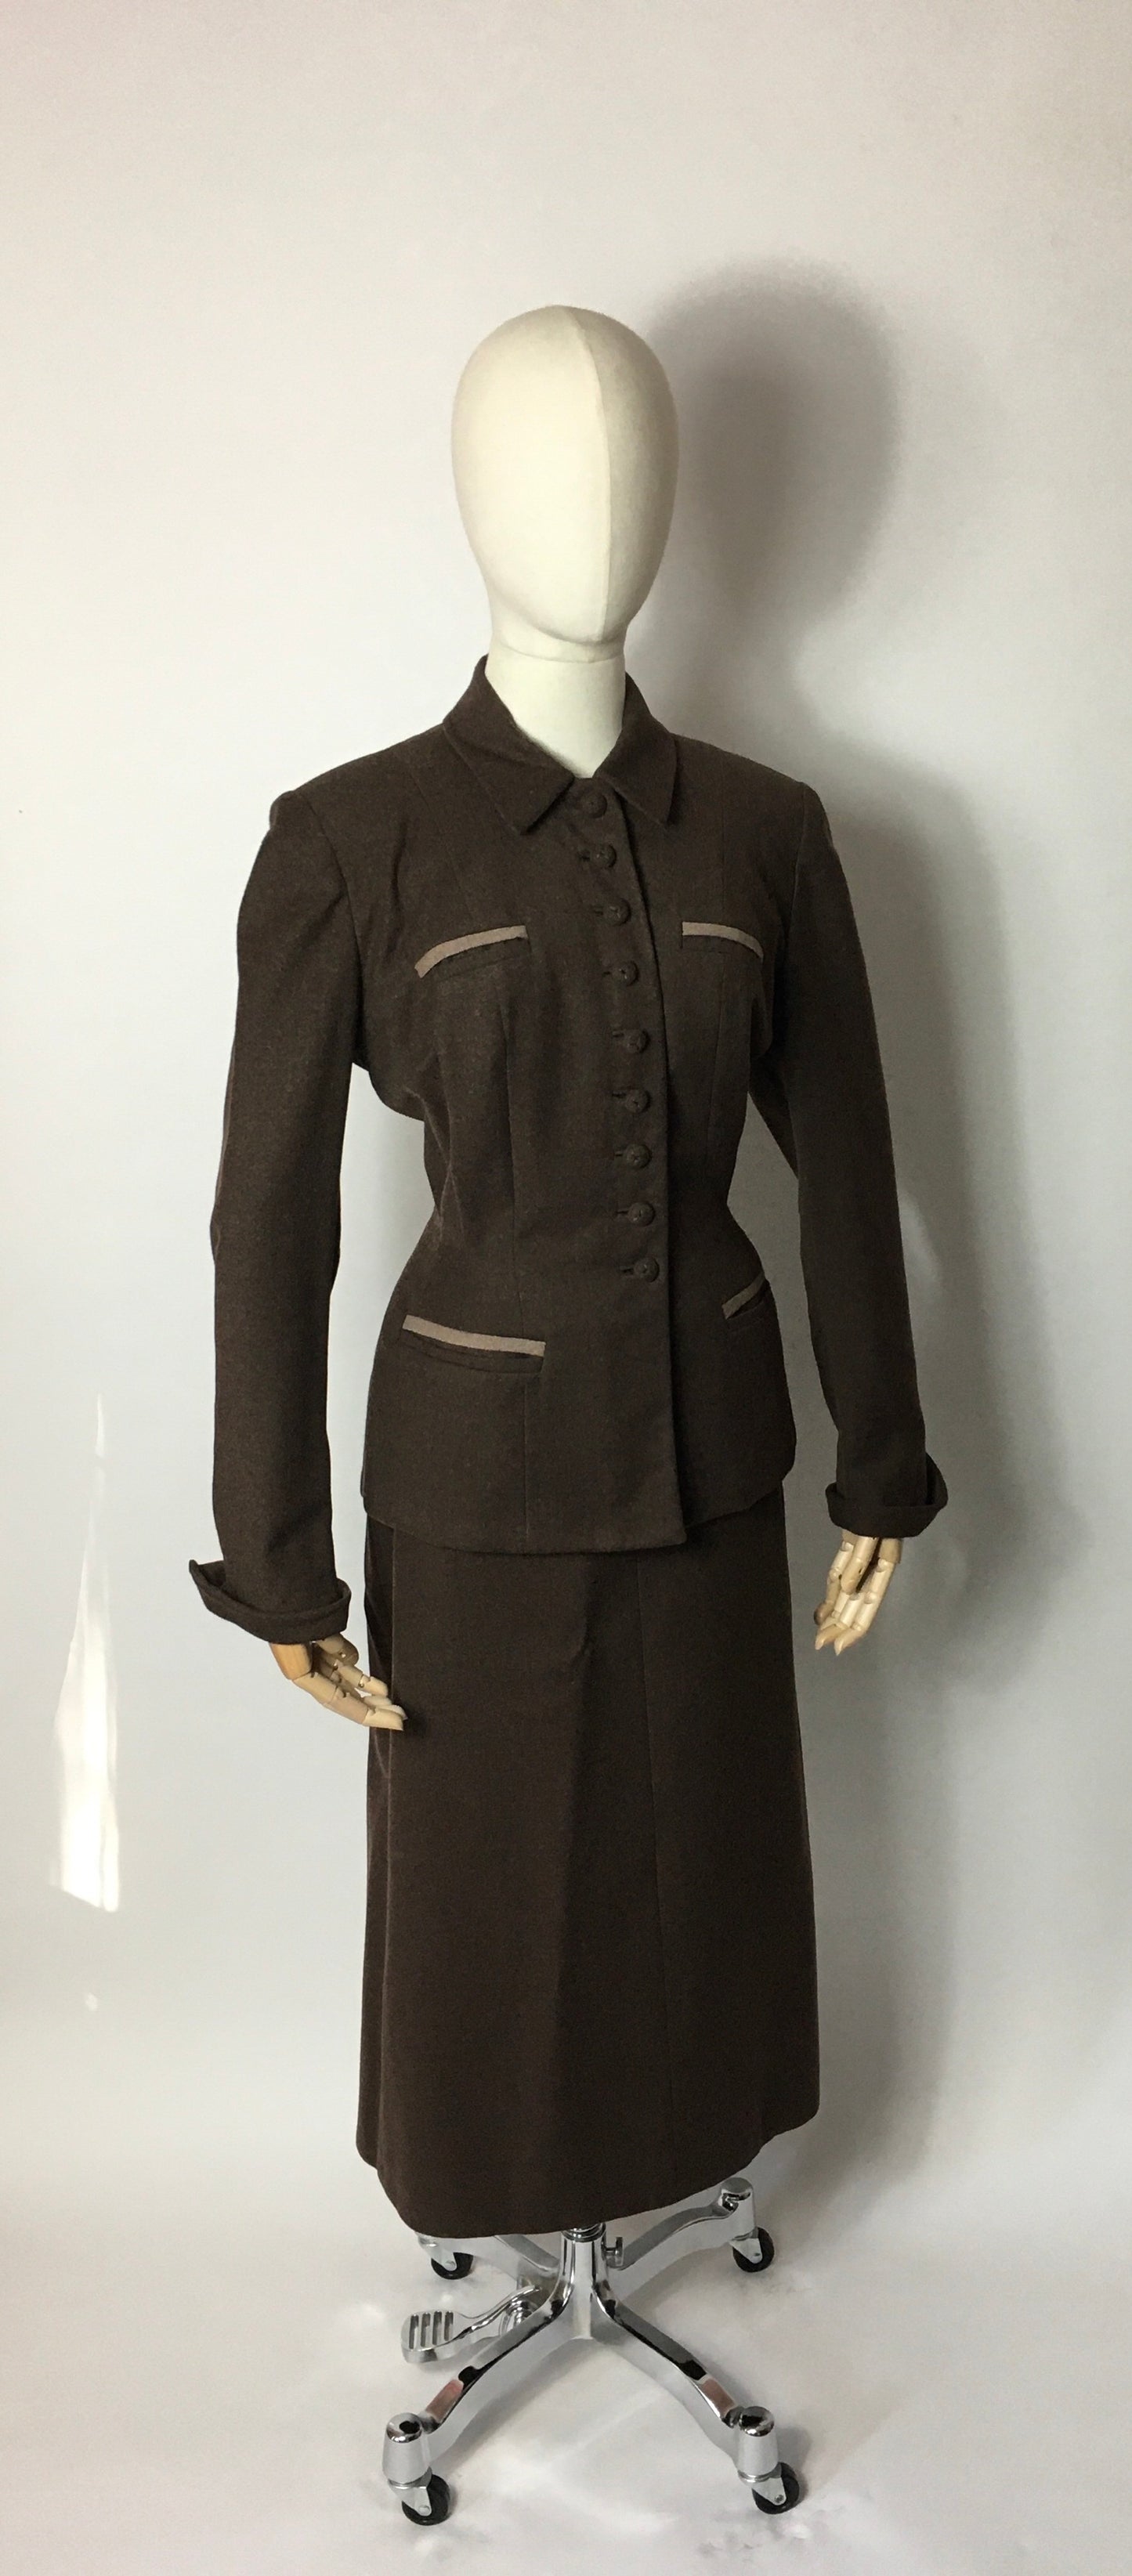 Original 1940’s 2pc Suit in A Lovely Brown Wool, Stunning Detailing and Seamwork